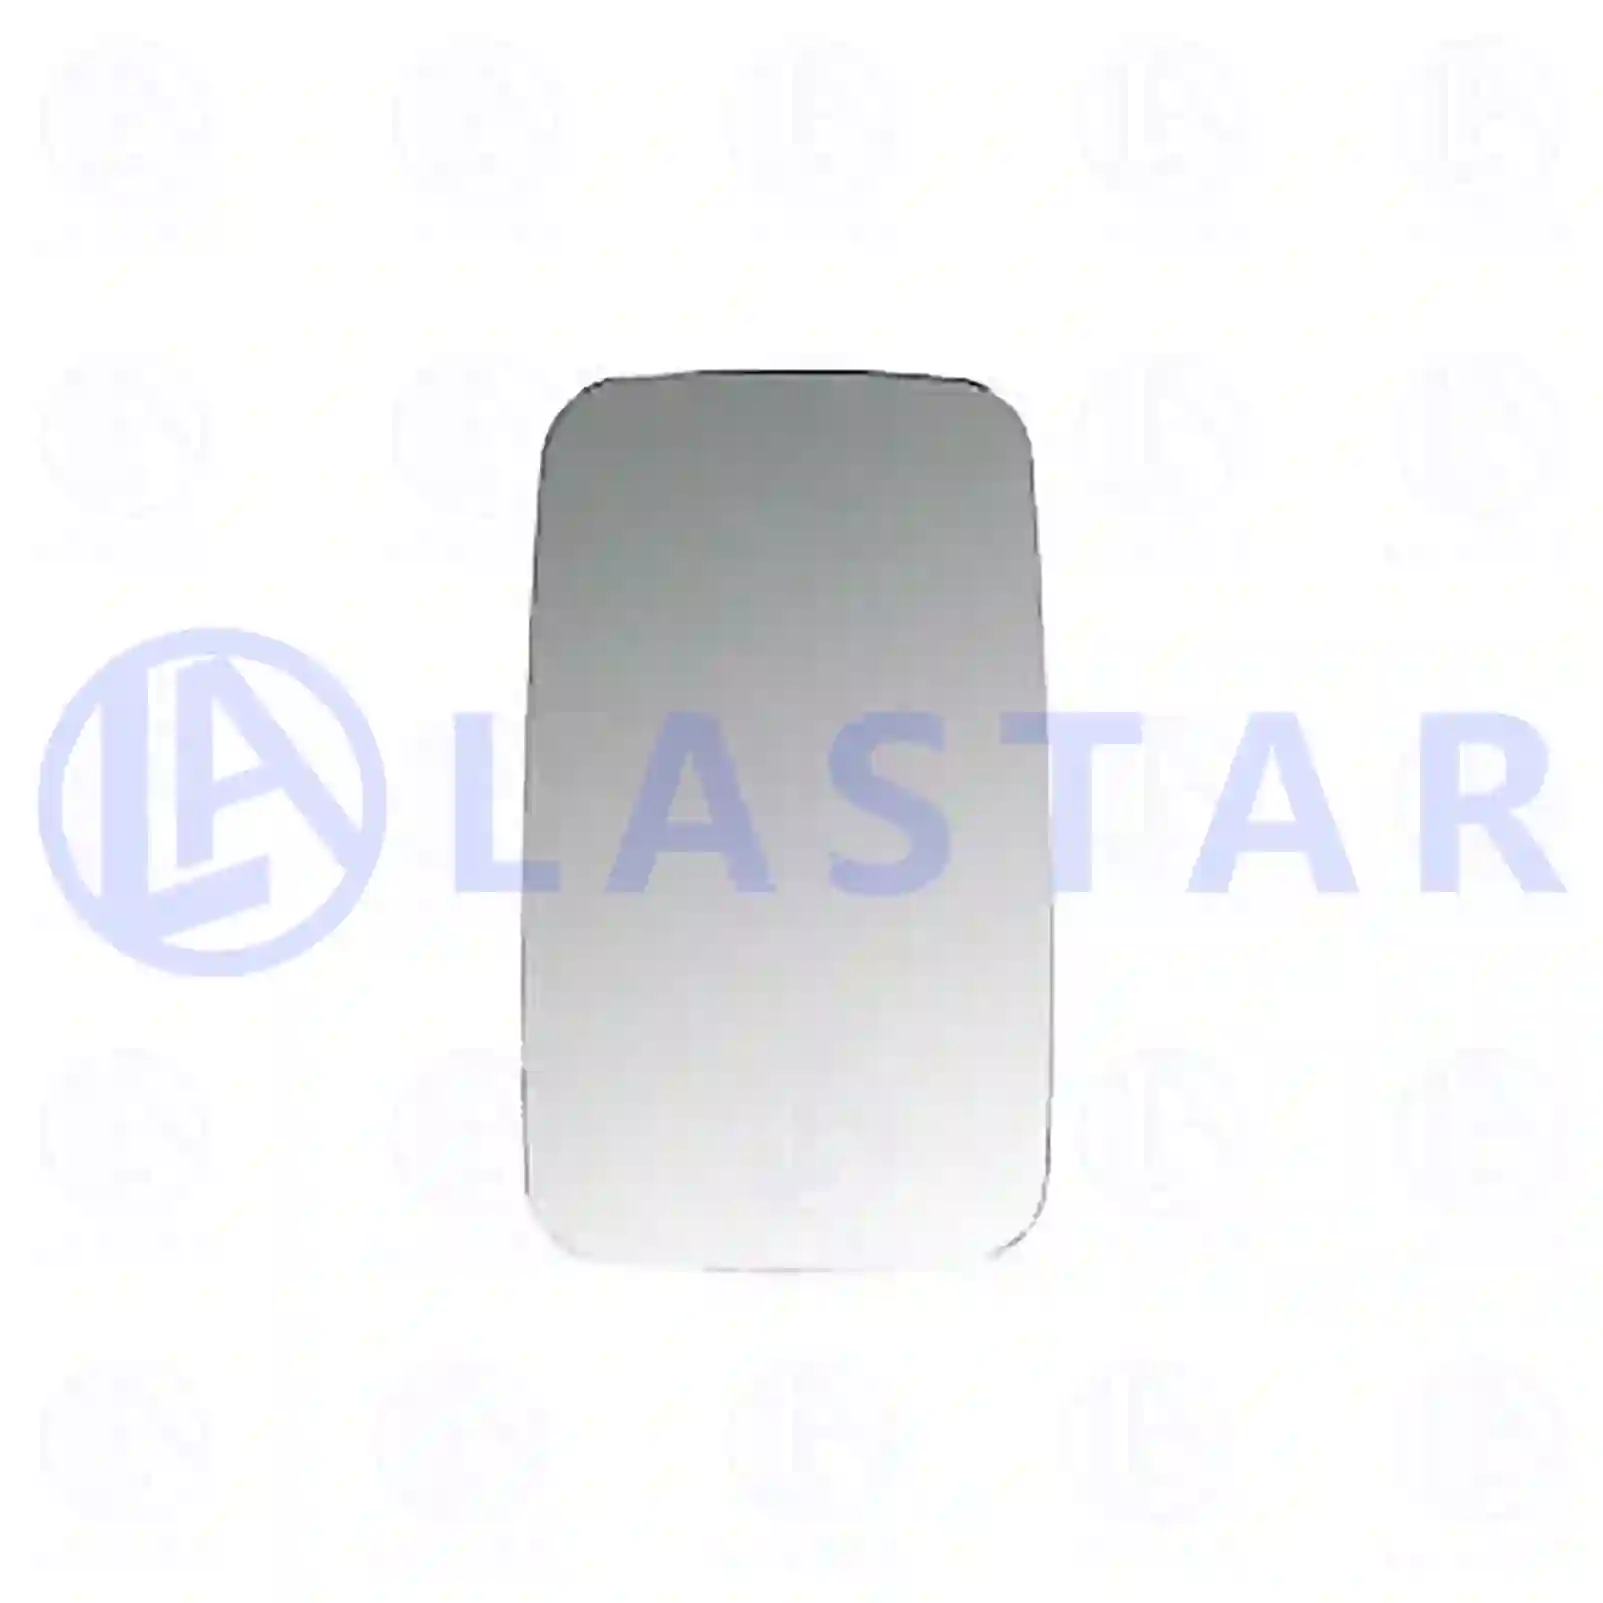 Mirror glass, main mirror, heated, 77718551, 02628194, 2628194, 81637300032, 81637330033, 81637330064, 81637336003, 81637336006, 85200009597, 0008116633, 190553201, 1581602, 1594415, 2628194 ||  77718551 Lastar Spare Part | Truck Spare Parts, Auotomotive Spare Parts Mirror glass, main mirror, heated, 77718551, 02628194, 2628194, 81637300032, 81637330033, 81637330064, 81637336003, 81637336006, 85200009597, 0008116633, 190553201, 1581602, 1594415, 2628194 ||  77718551 Lastar Spare Part | Truck Spare Parts, Auotomotive Spare Parts